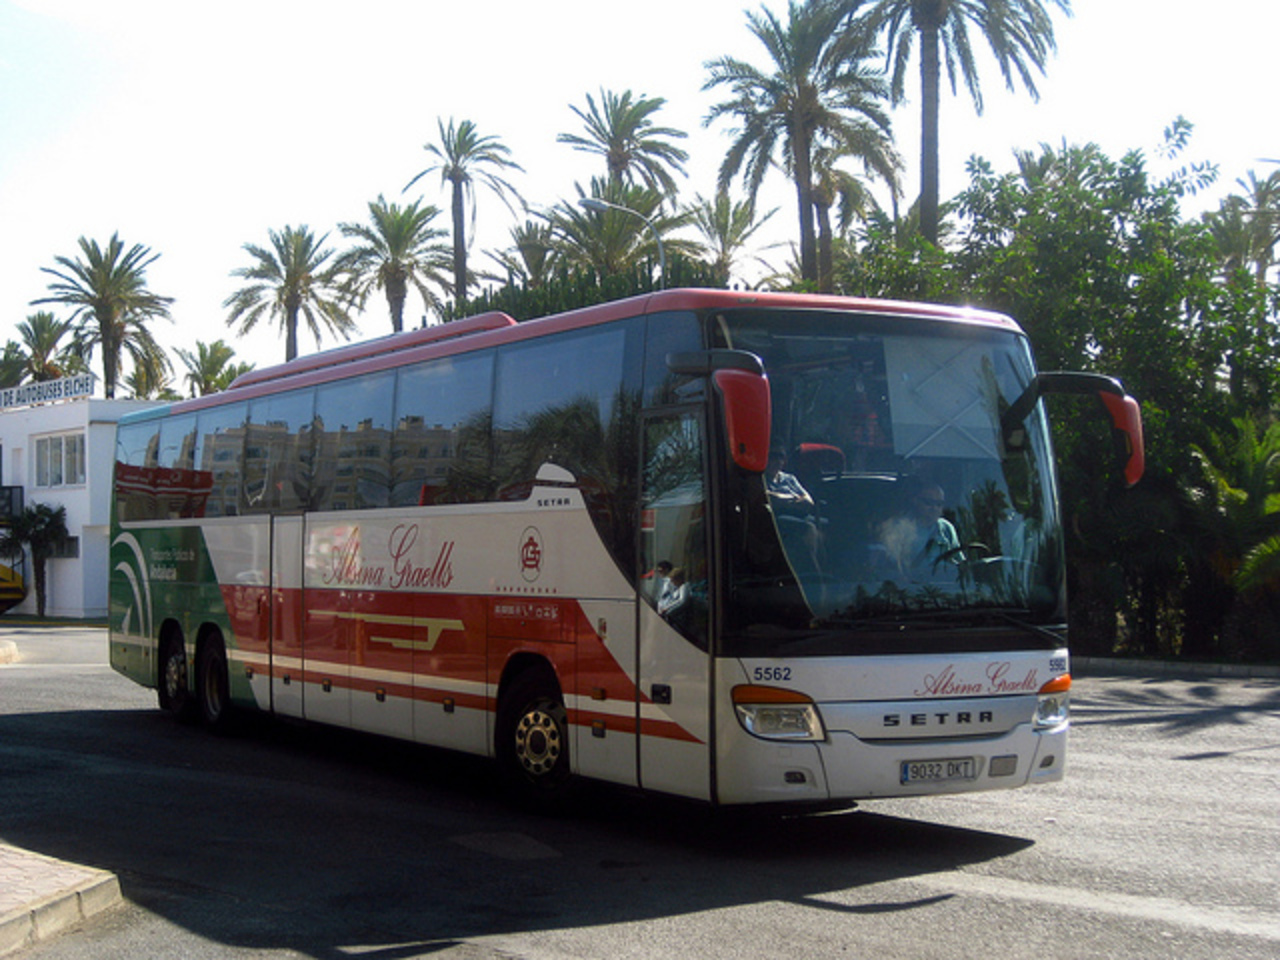 Flickr: The Spanish Buses Pool